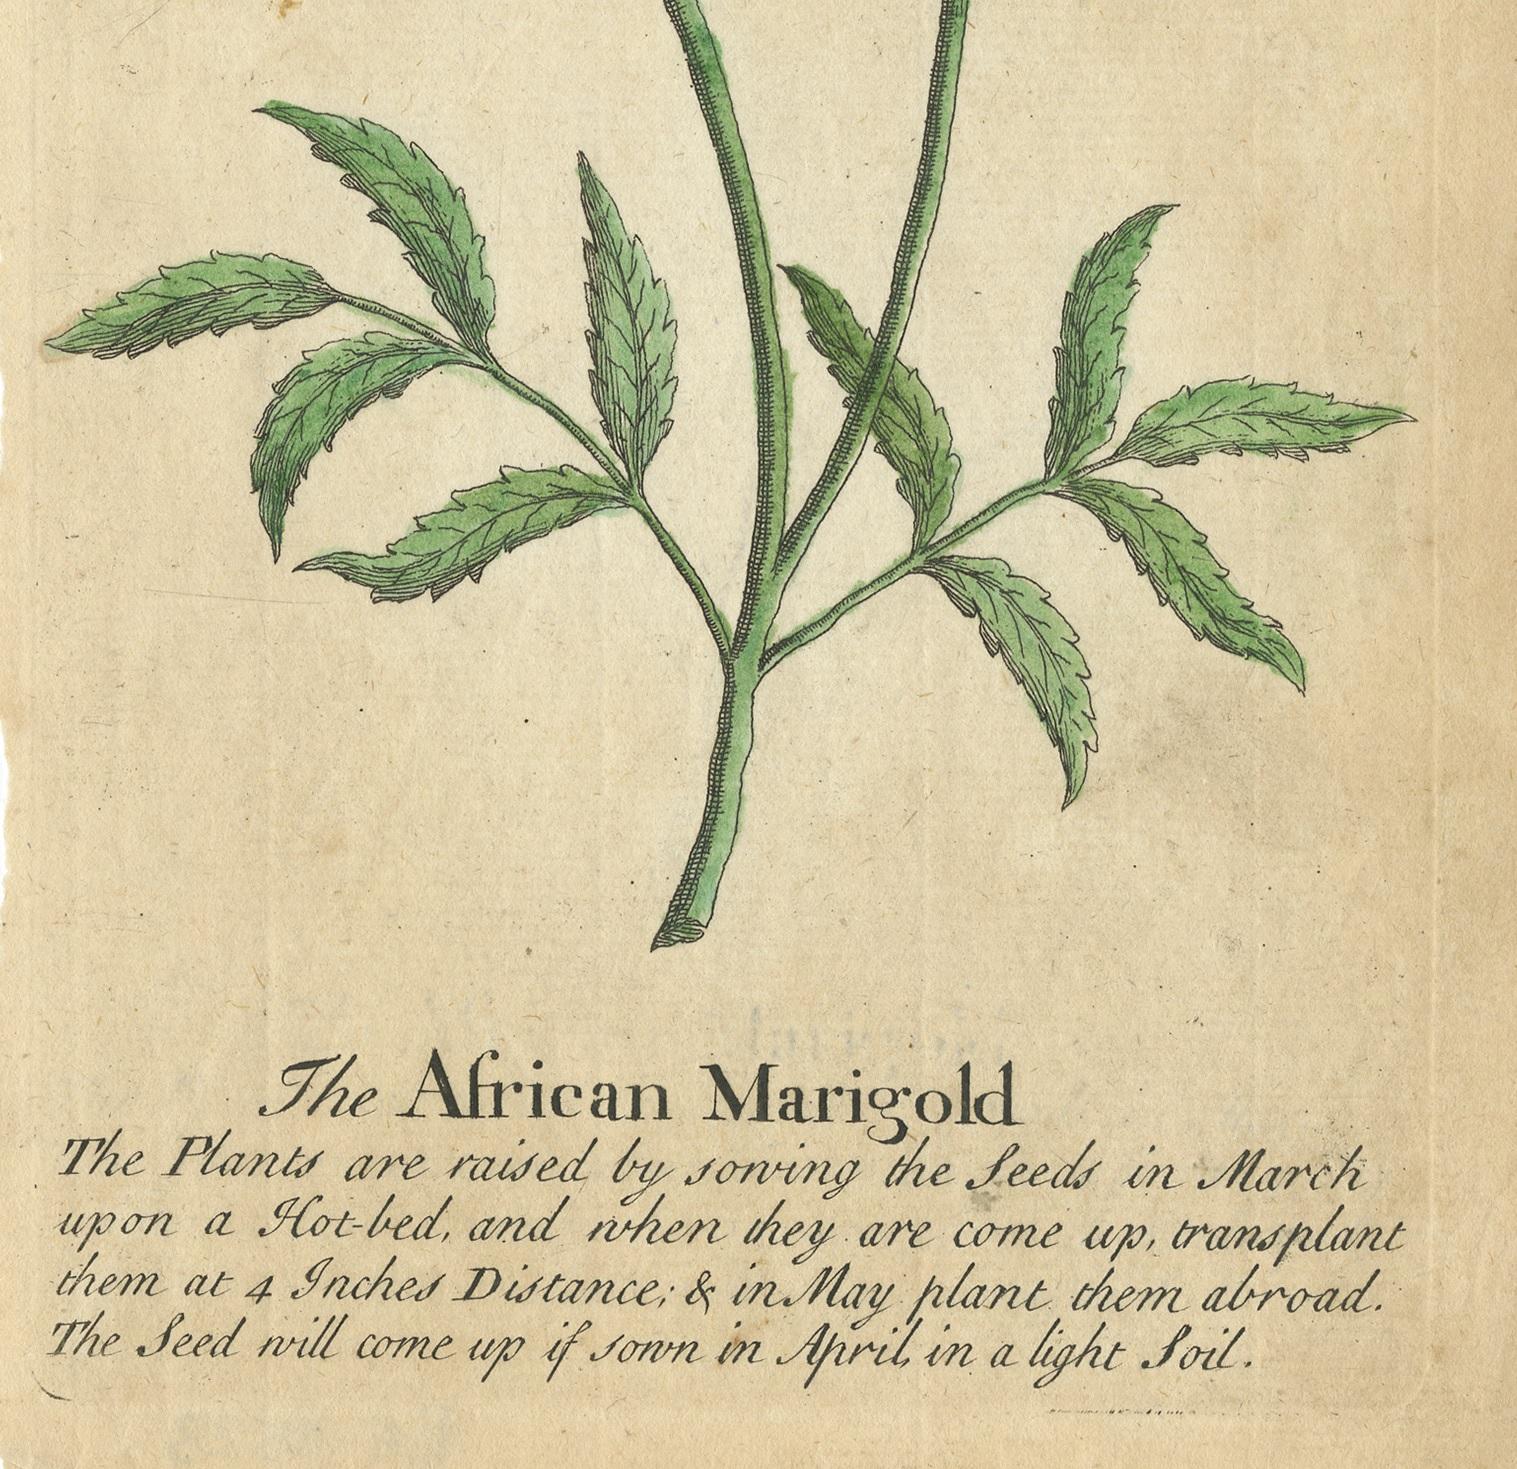 English Antique Print of the African Marigold Flower, 1747